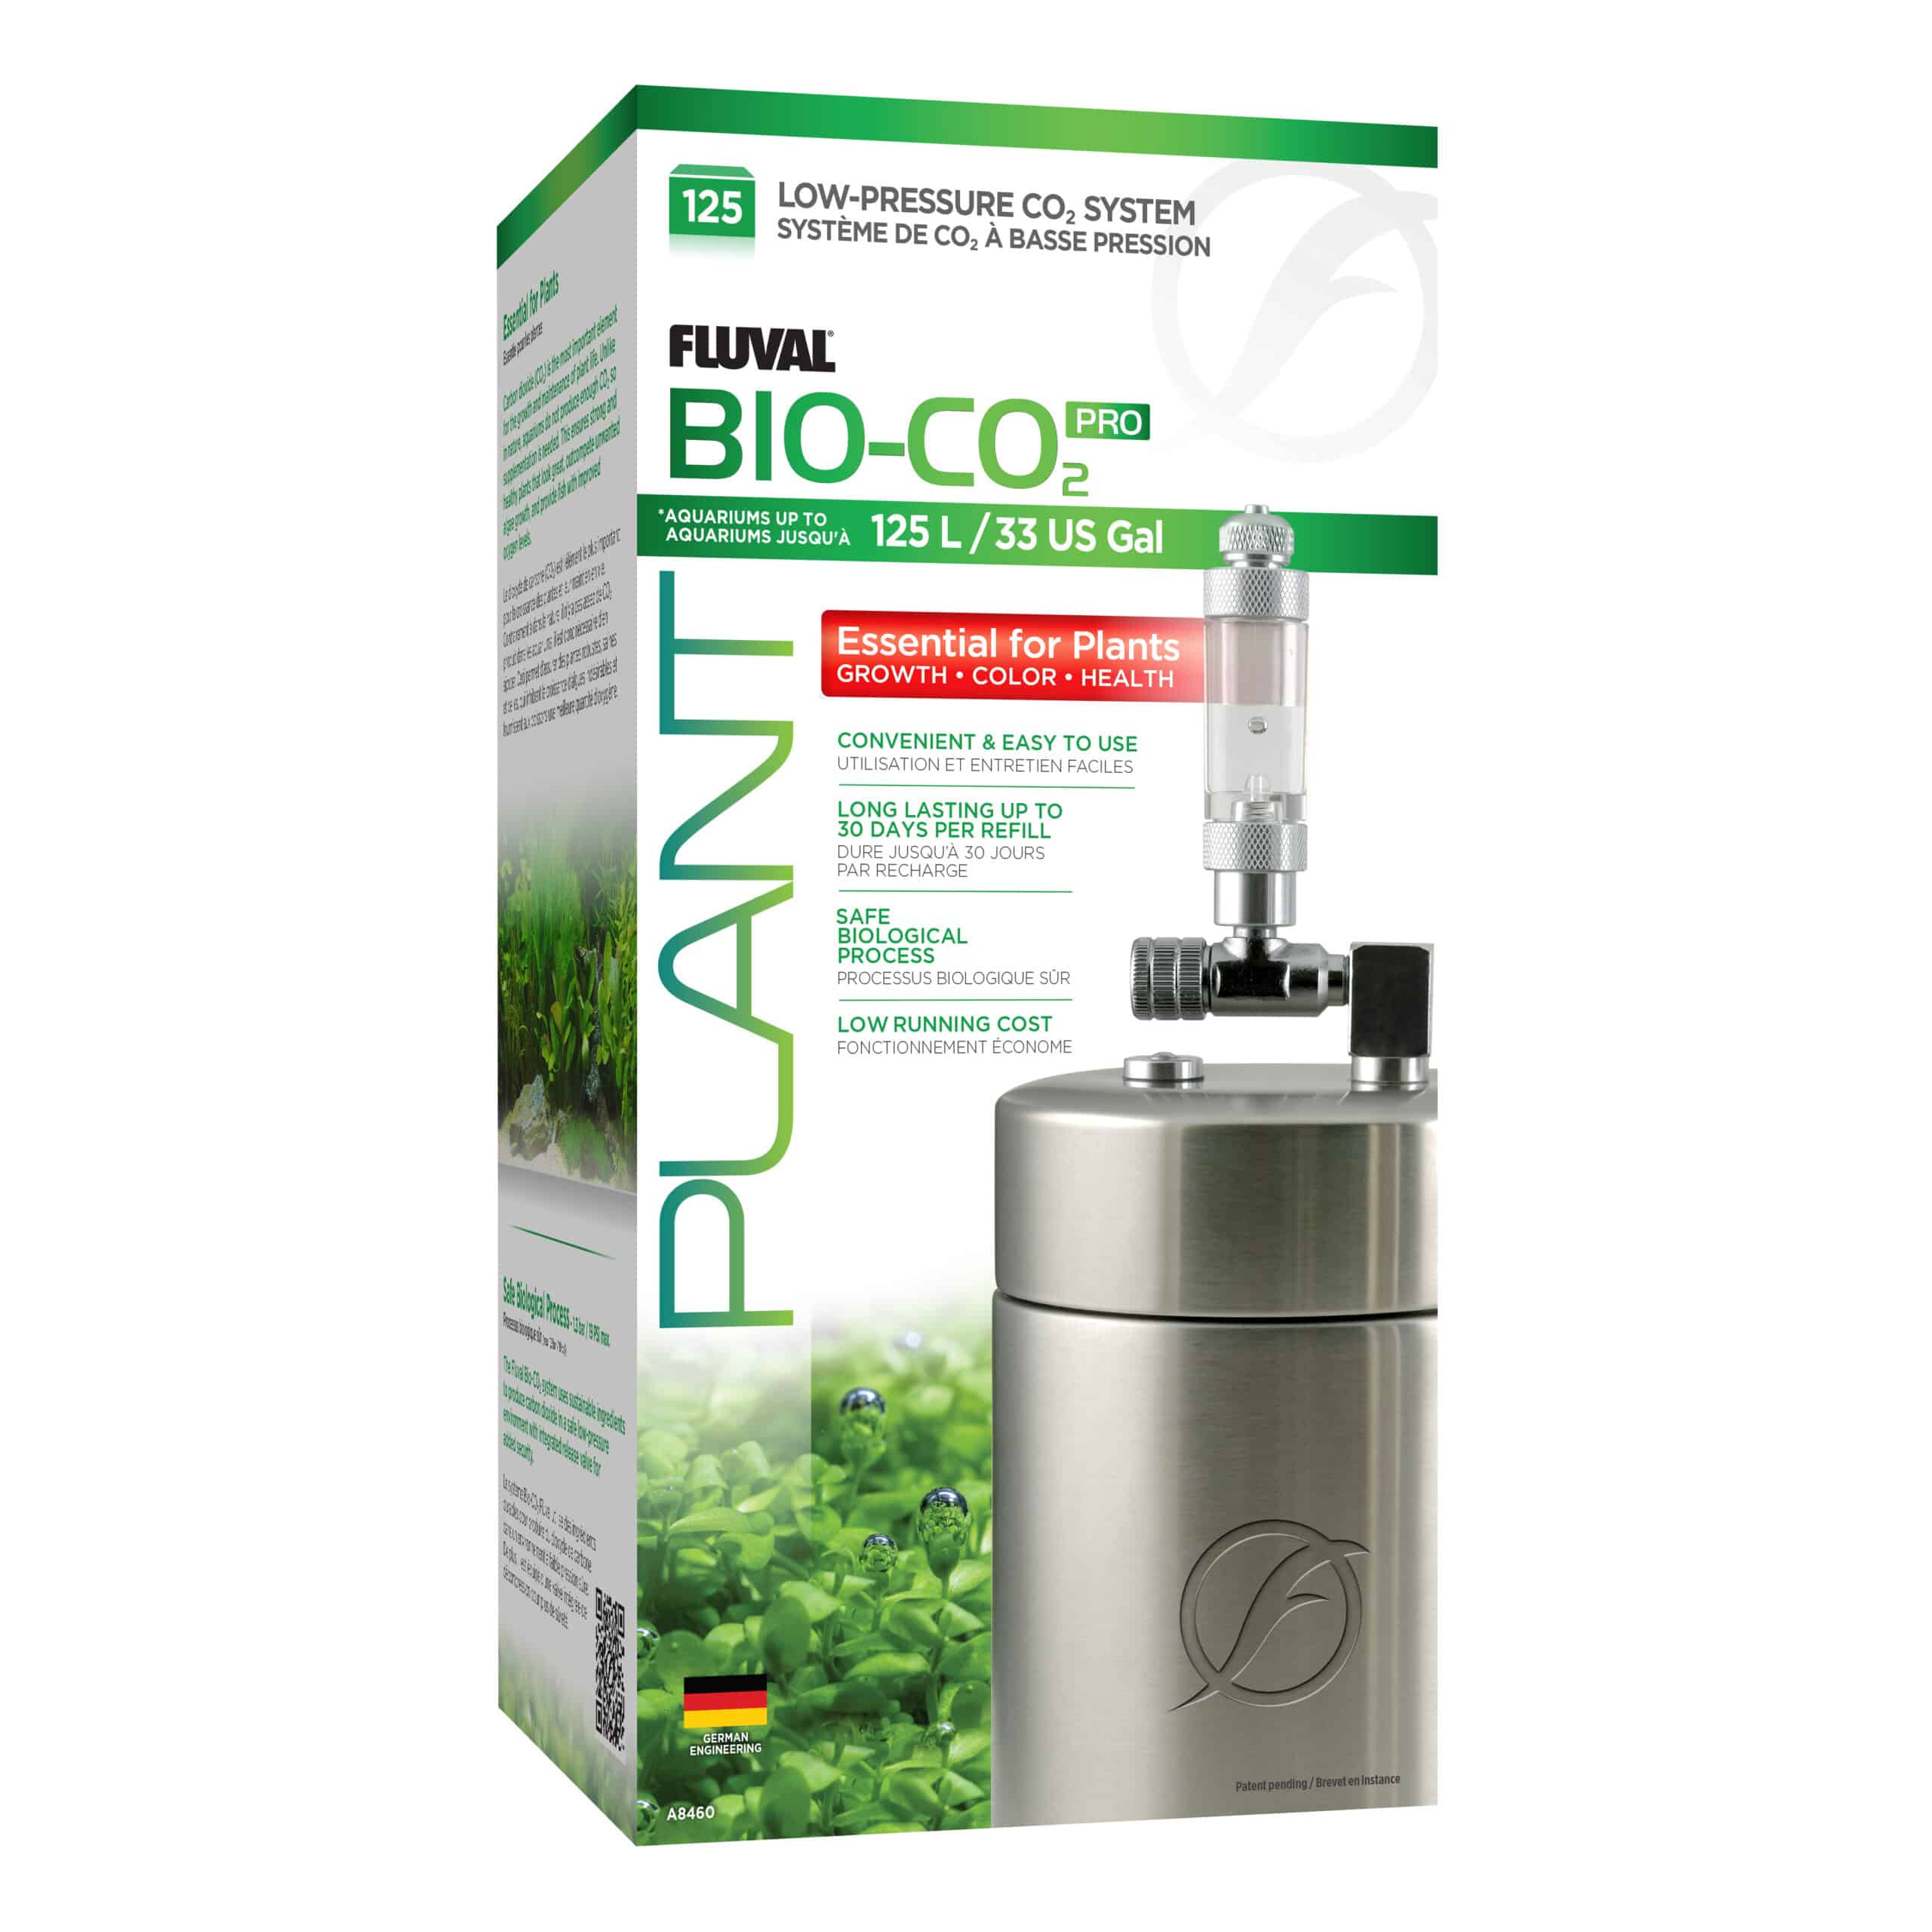 Bio-CO2 Pro Low-Pressure System, up to 33 US Gal / 125 L - Fluval USA